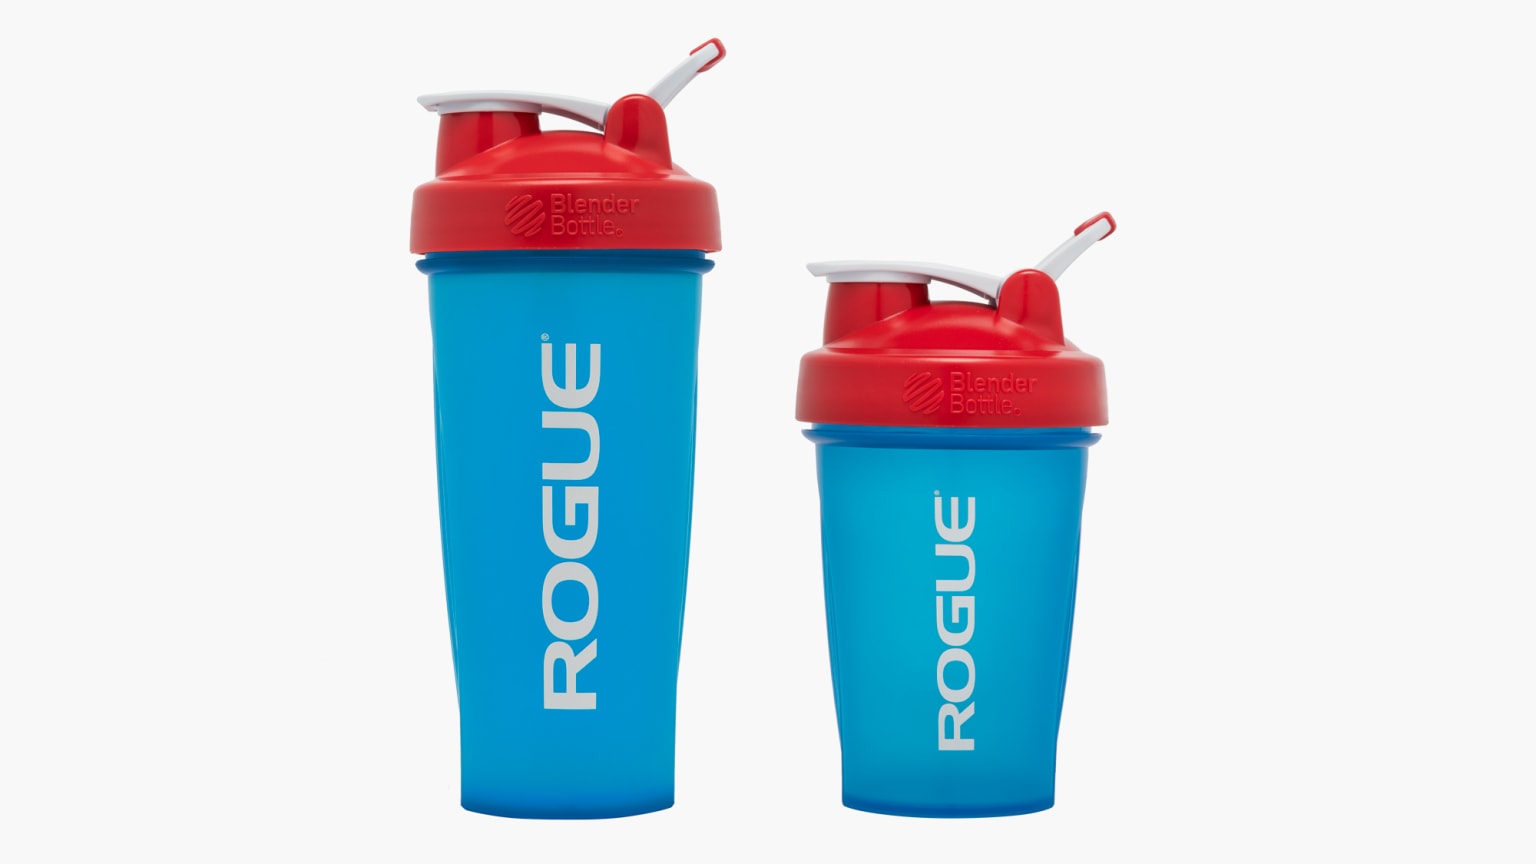 https://assets.roguefitness.com/f_auto,q_auto,c_limit,w_1536,b_rgb:f8f8f8/catalog/Gear%20and%20Accessories/Accessories/Shakers%20and%20Bottles/BBBLUE/BBBLUE-H_fbfyb7.png